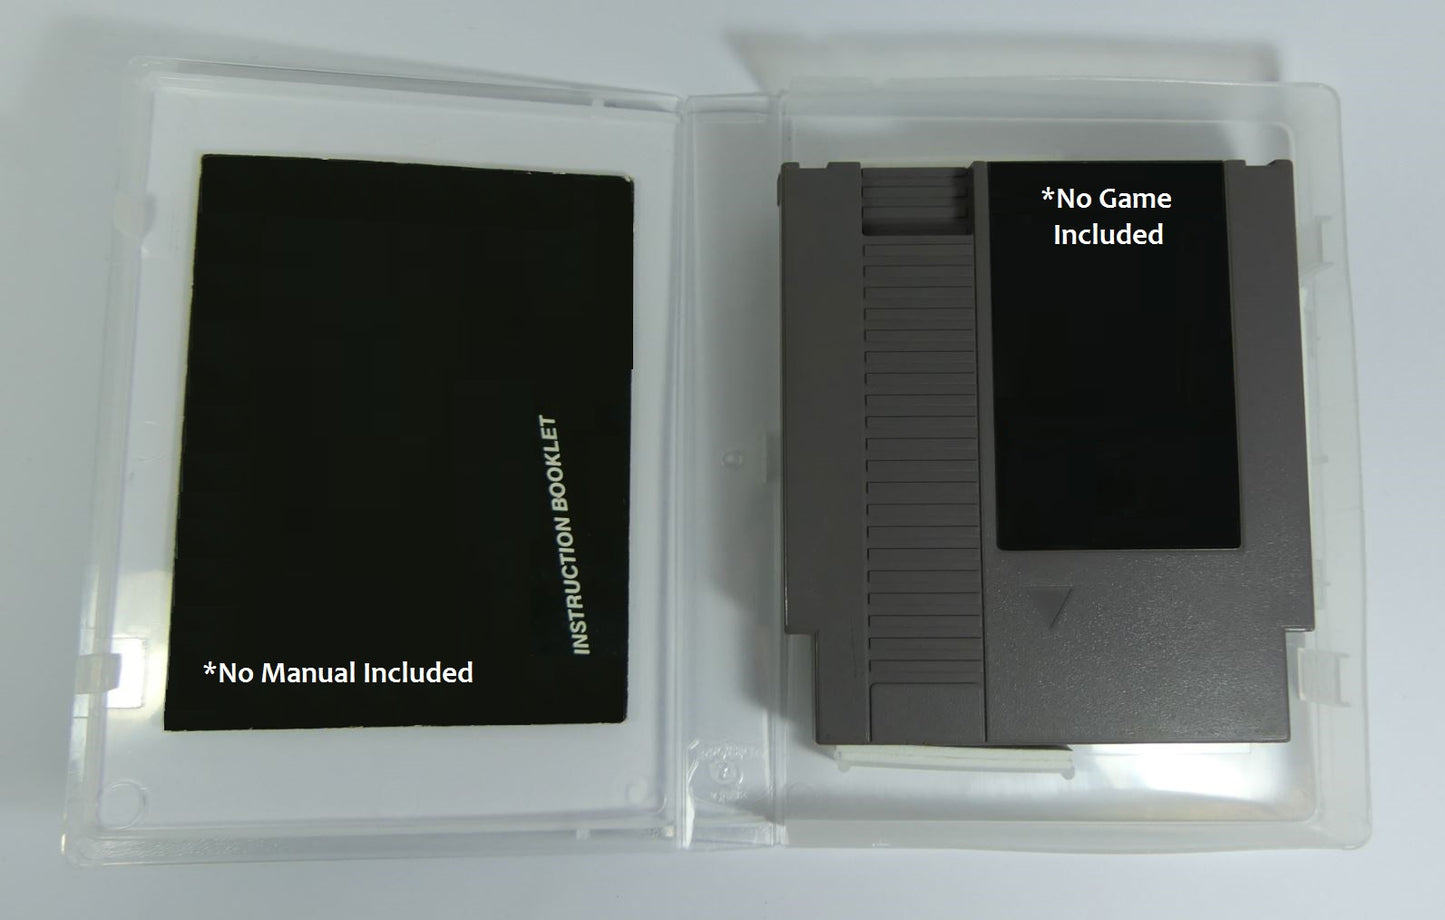 The Jetsons Cogswell's Caper - NES Replacement Case